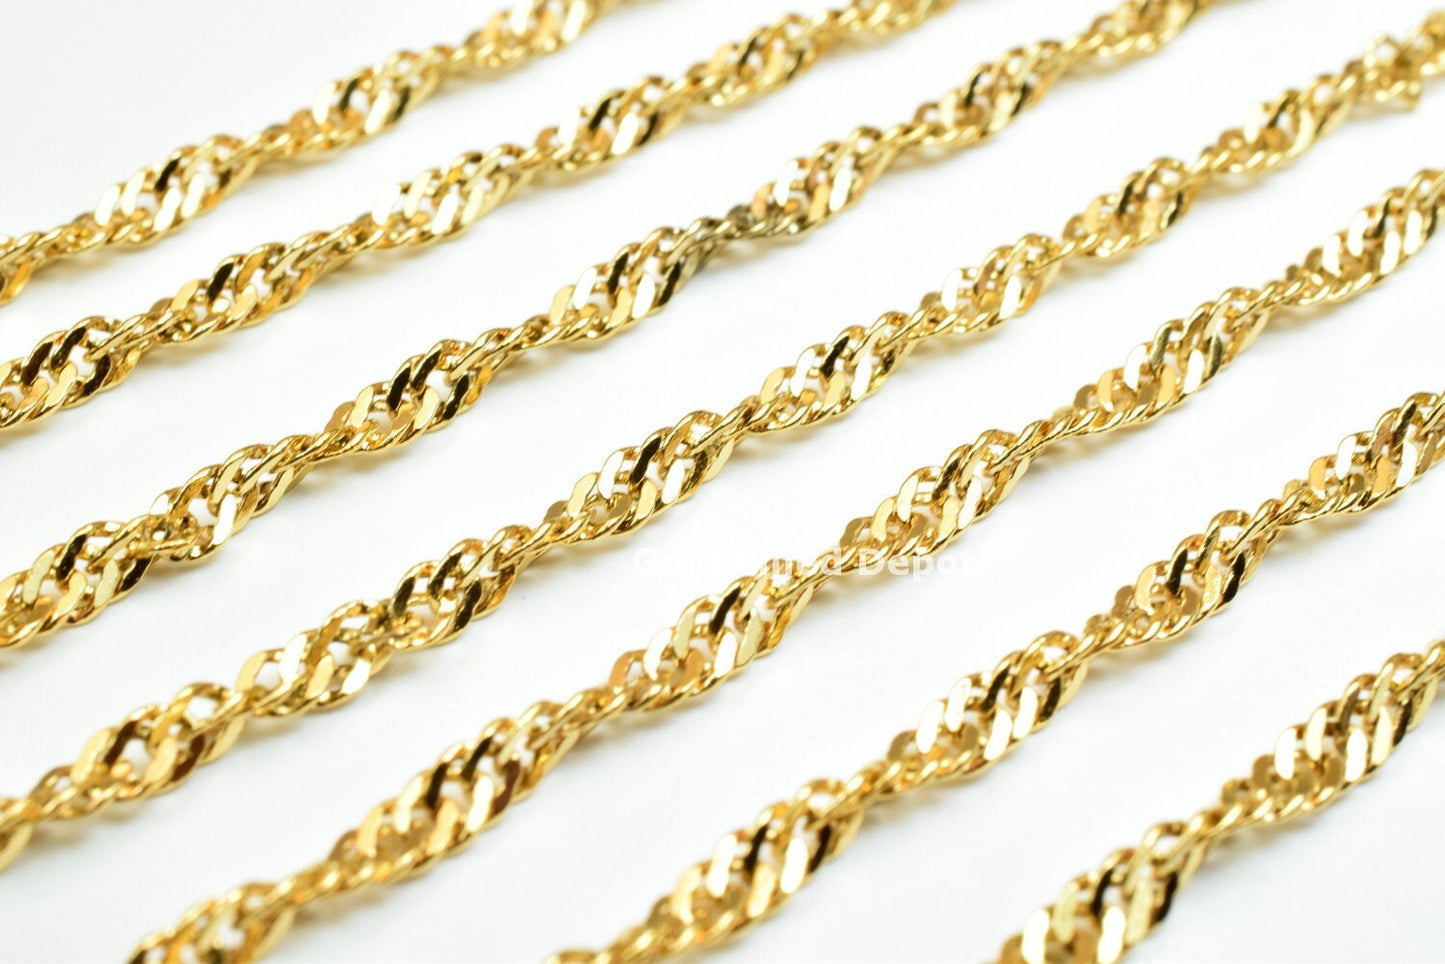 3 Foot 18K Gold Filled Flat Twist Snake Chain Size 2.8mm Gold Filled Findings Chain For Jewelry Making GFC009